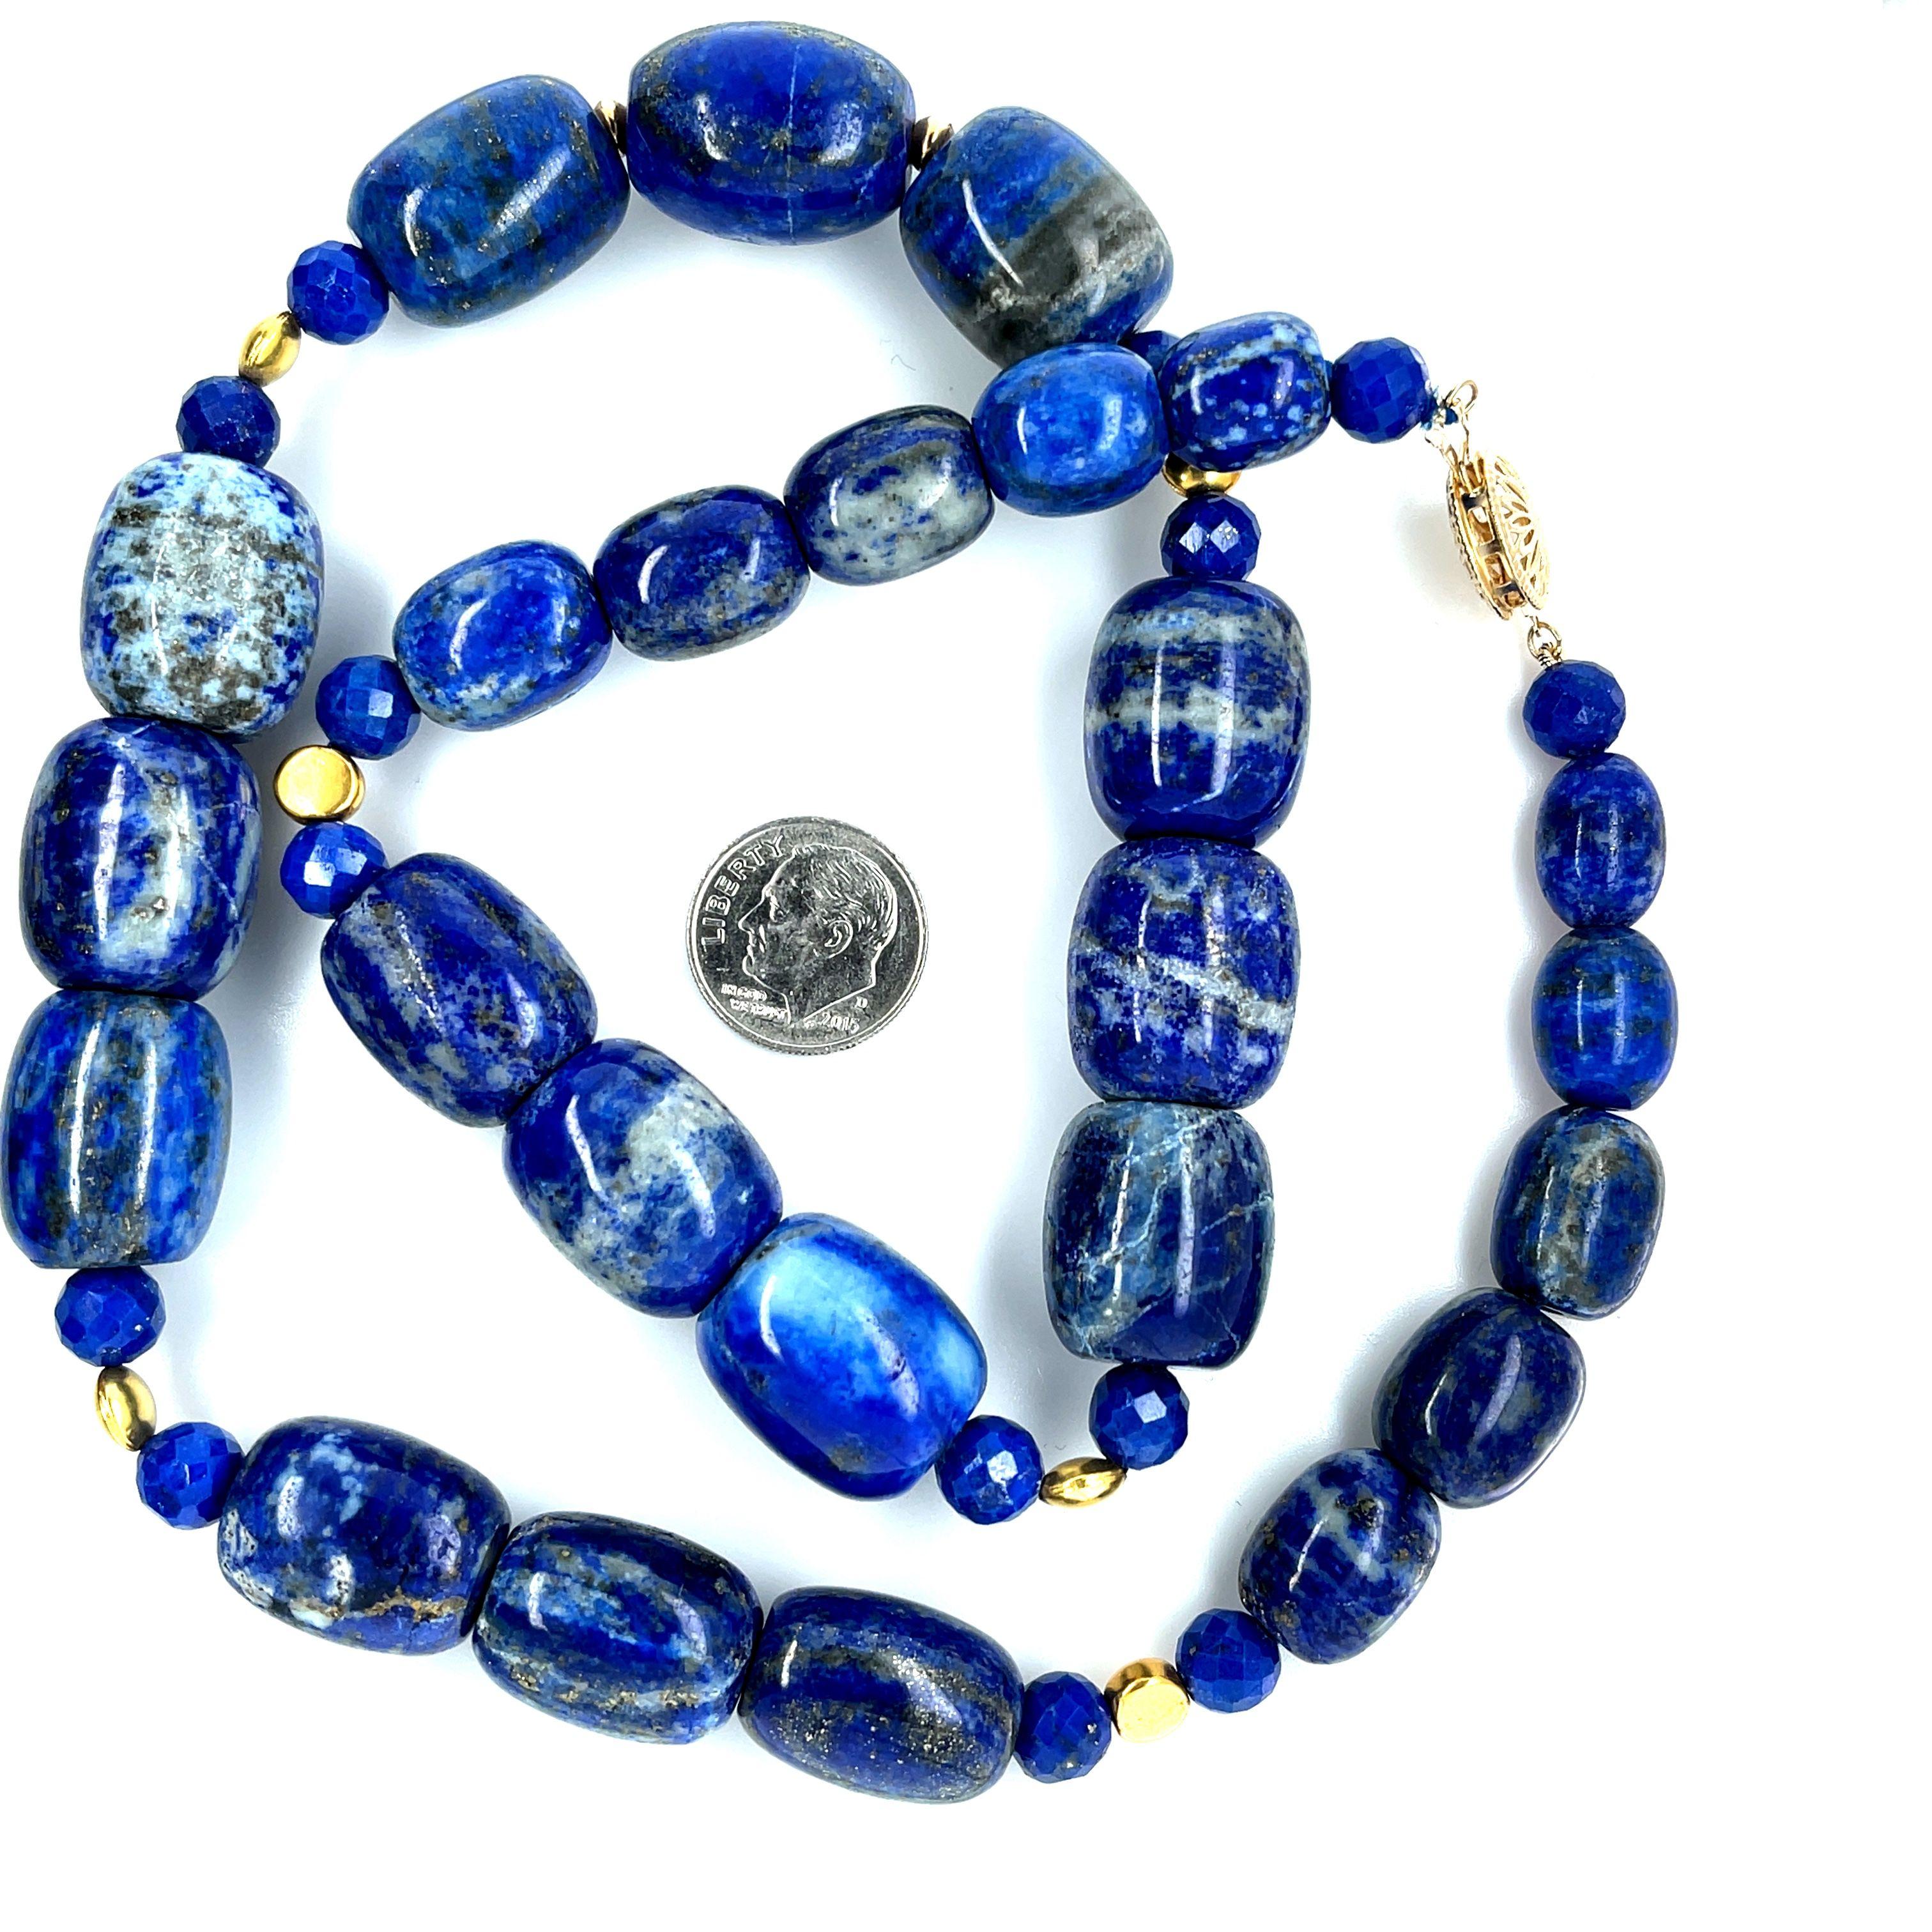 Lapis Lazuli Barrel Shaped Beaded Necklace with Yellow Gold Accents, 22 Inches In New Condition For Sale In Los Angeles, CA